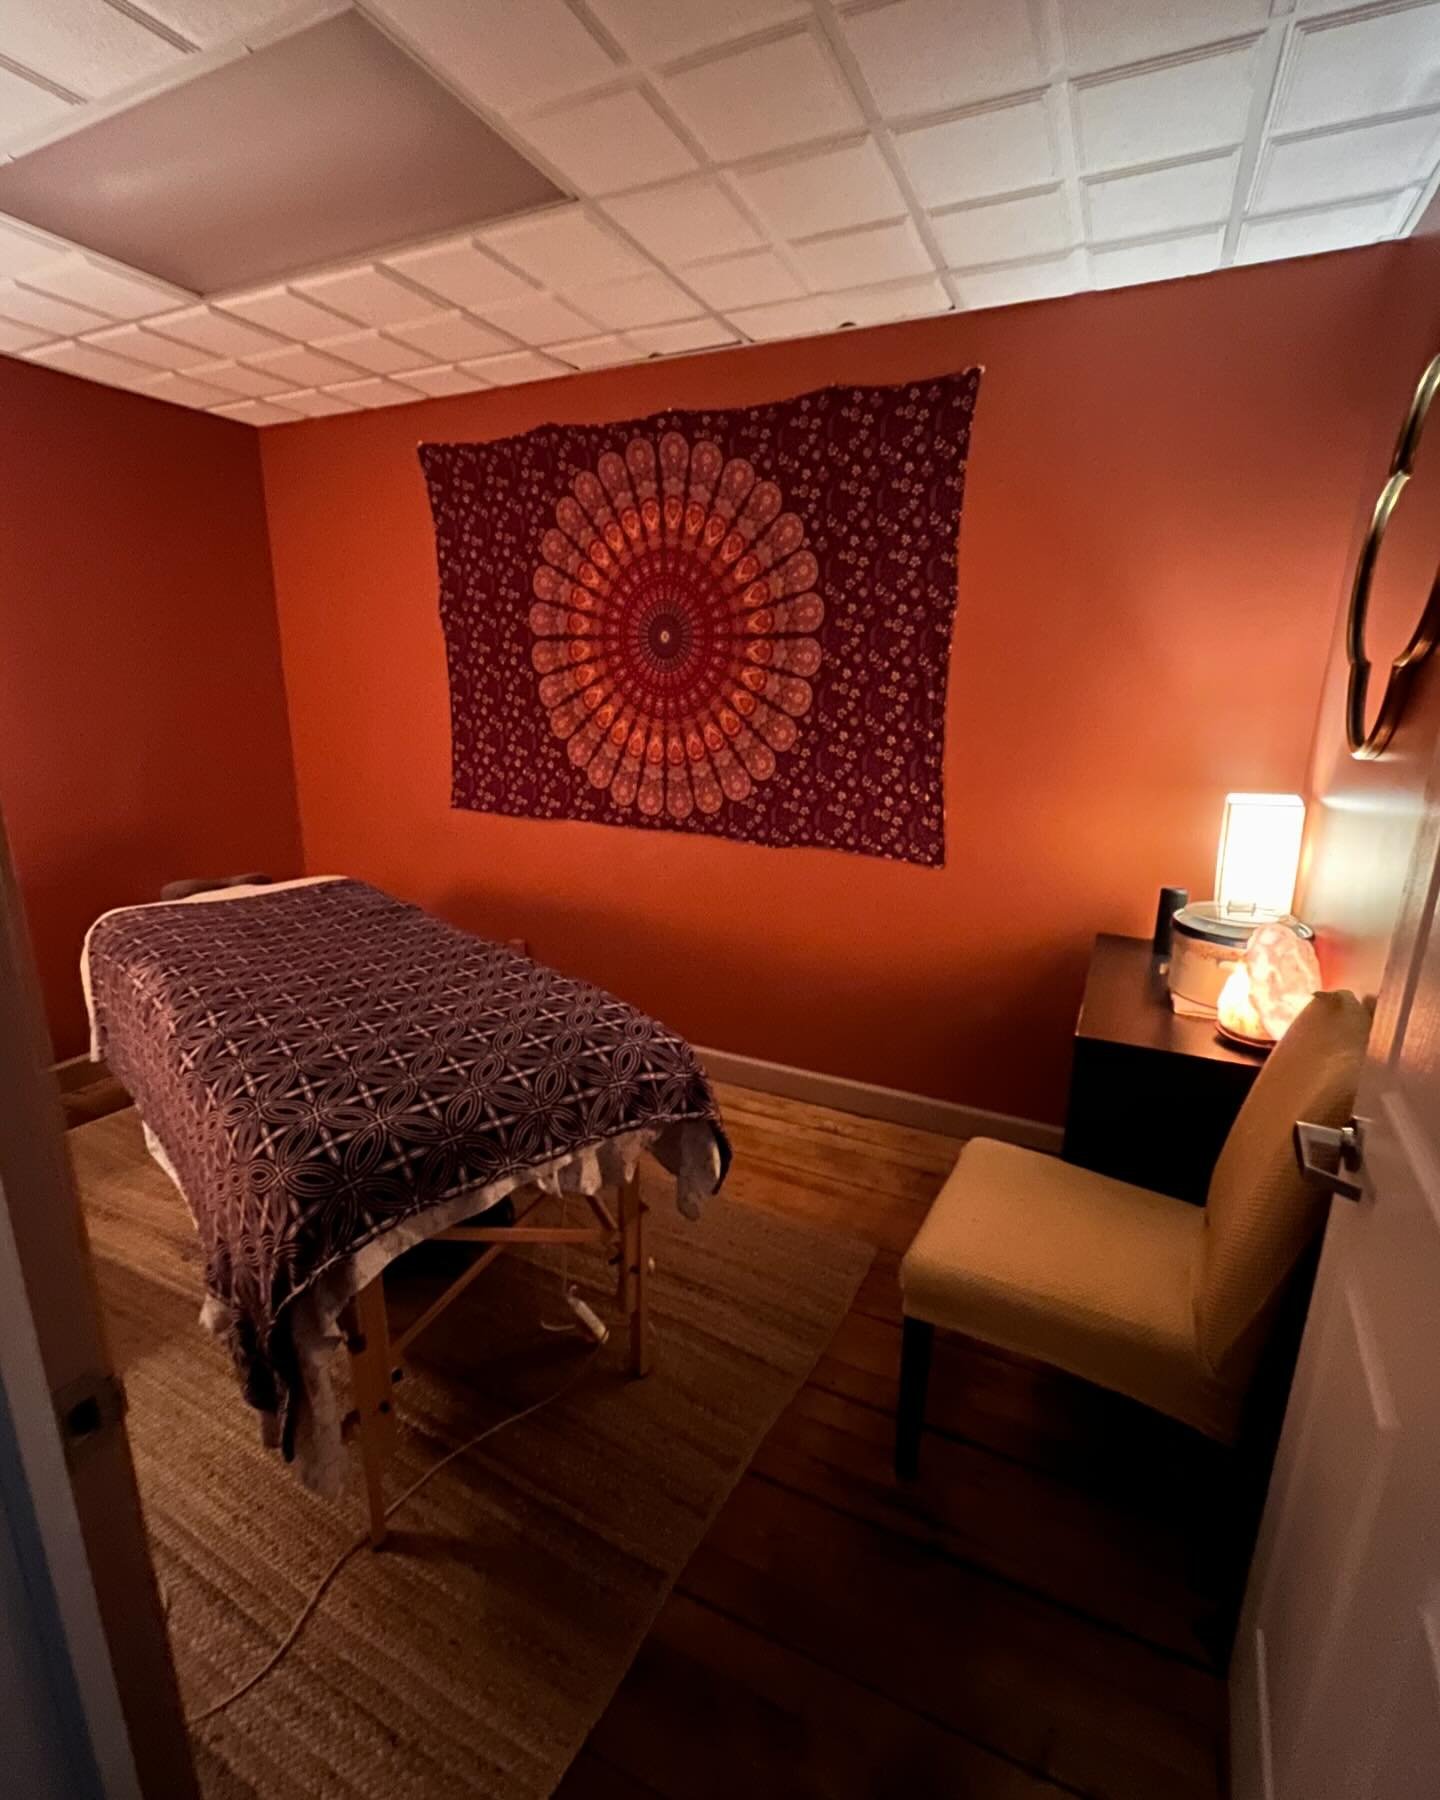 Are you look for a home for your massage therapy or body work practice?

Ethos has a room available! 

Extremely competitive rental fee (for real), and flexible scheduling.

Come be apart of a great community and offer your medicine. 🌷

Please reach